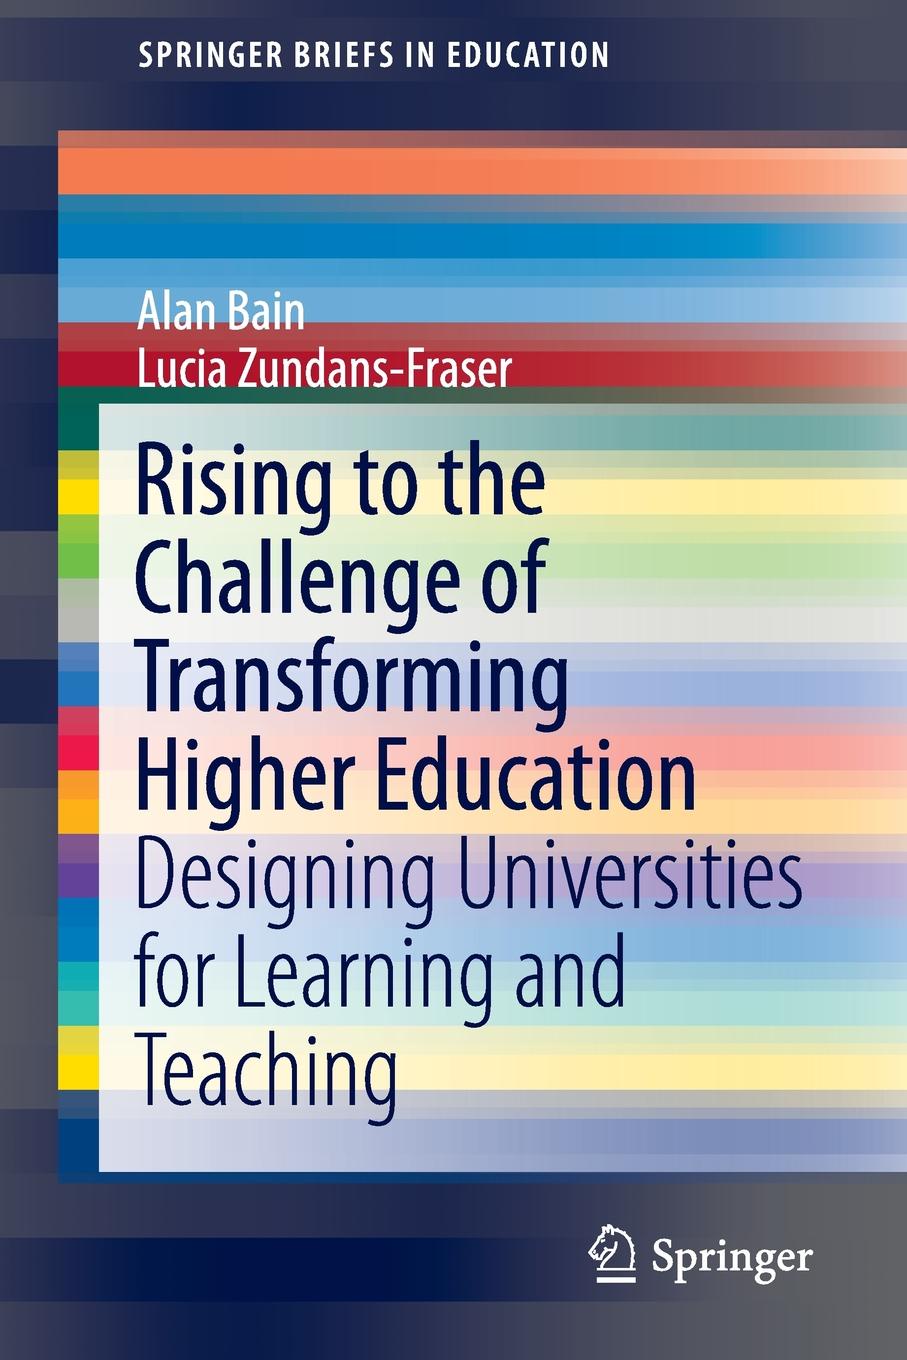 Rising to the Challenge of Transforming Higher Education. Designing Universities for Learning and Teaching